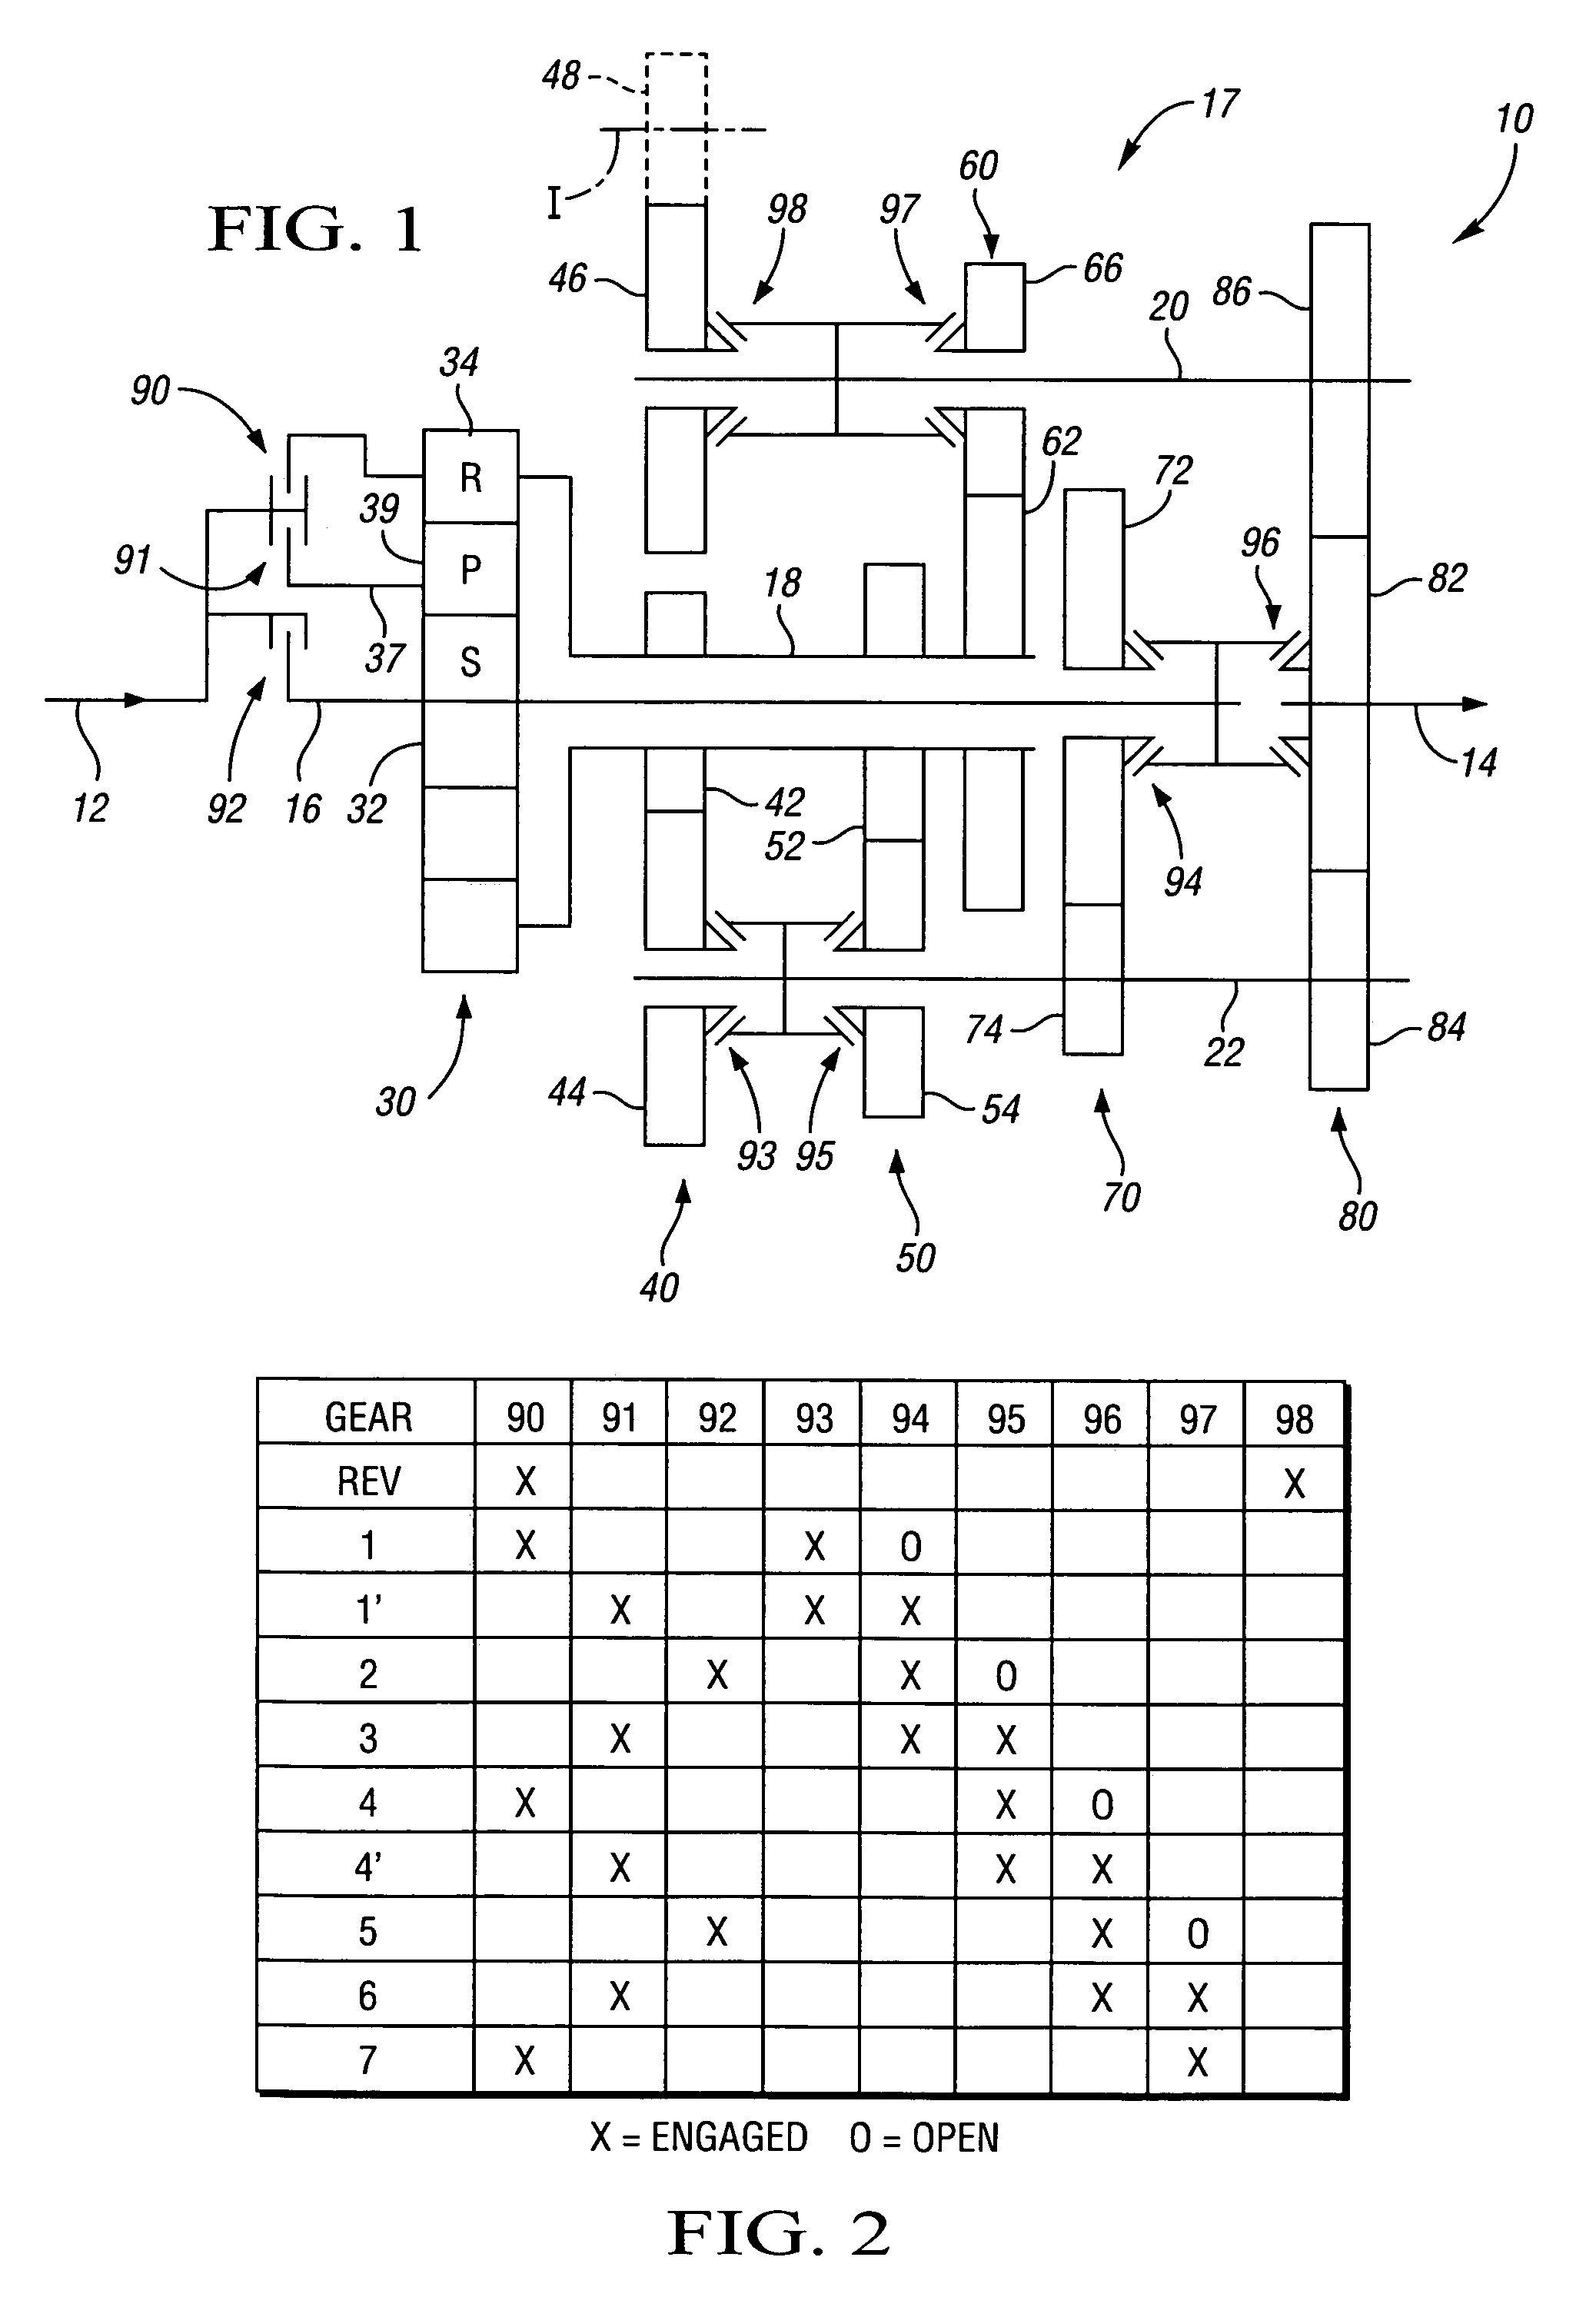 Multi-speed transmission with differential gear set and countershaft gearing